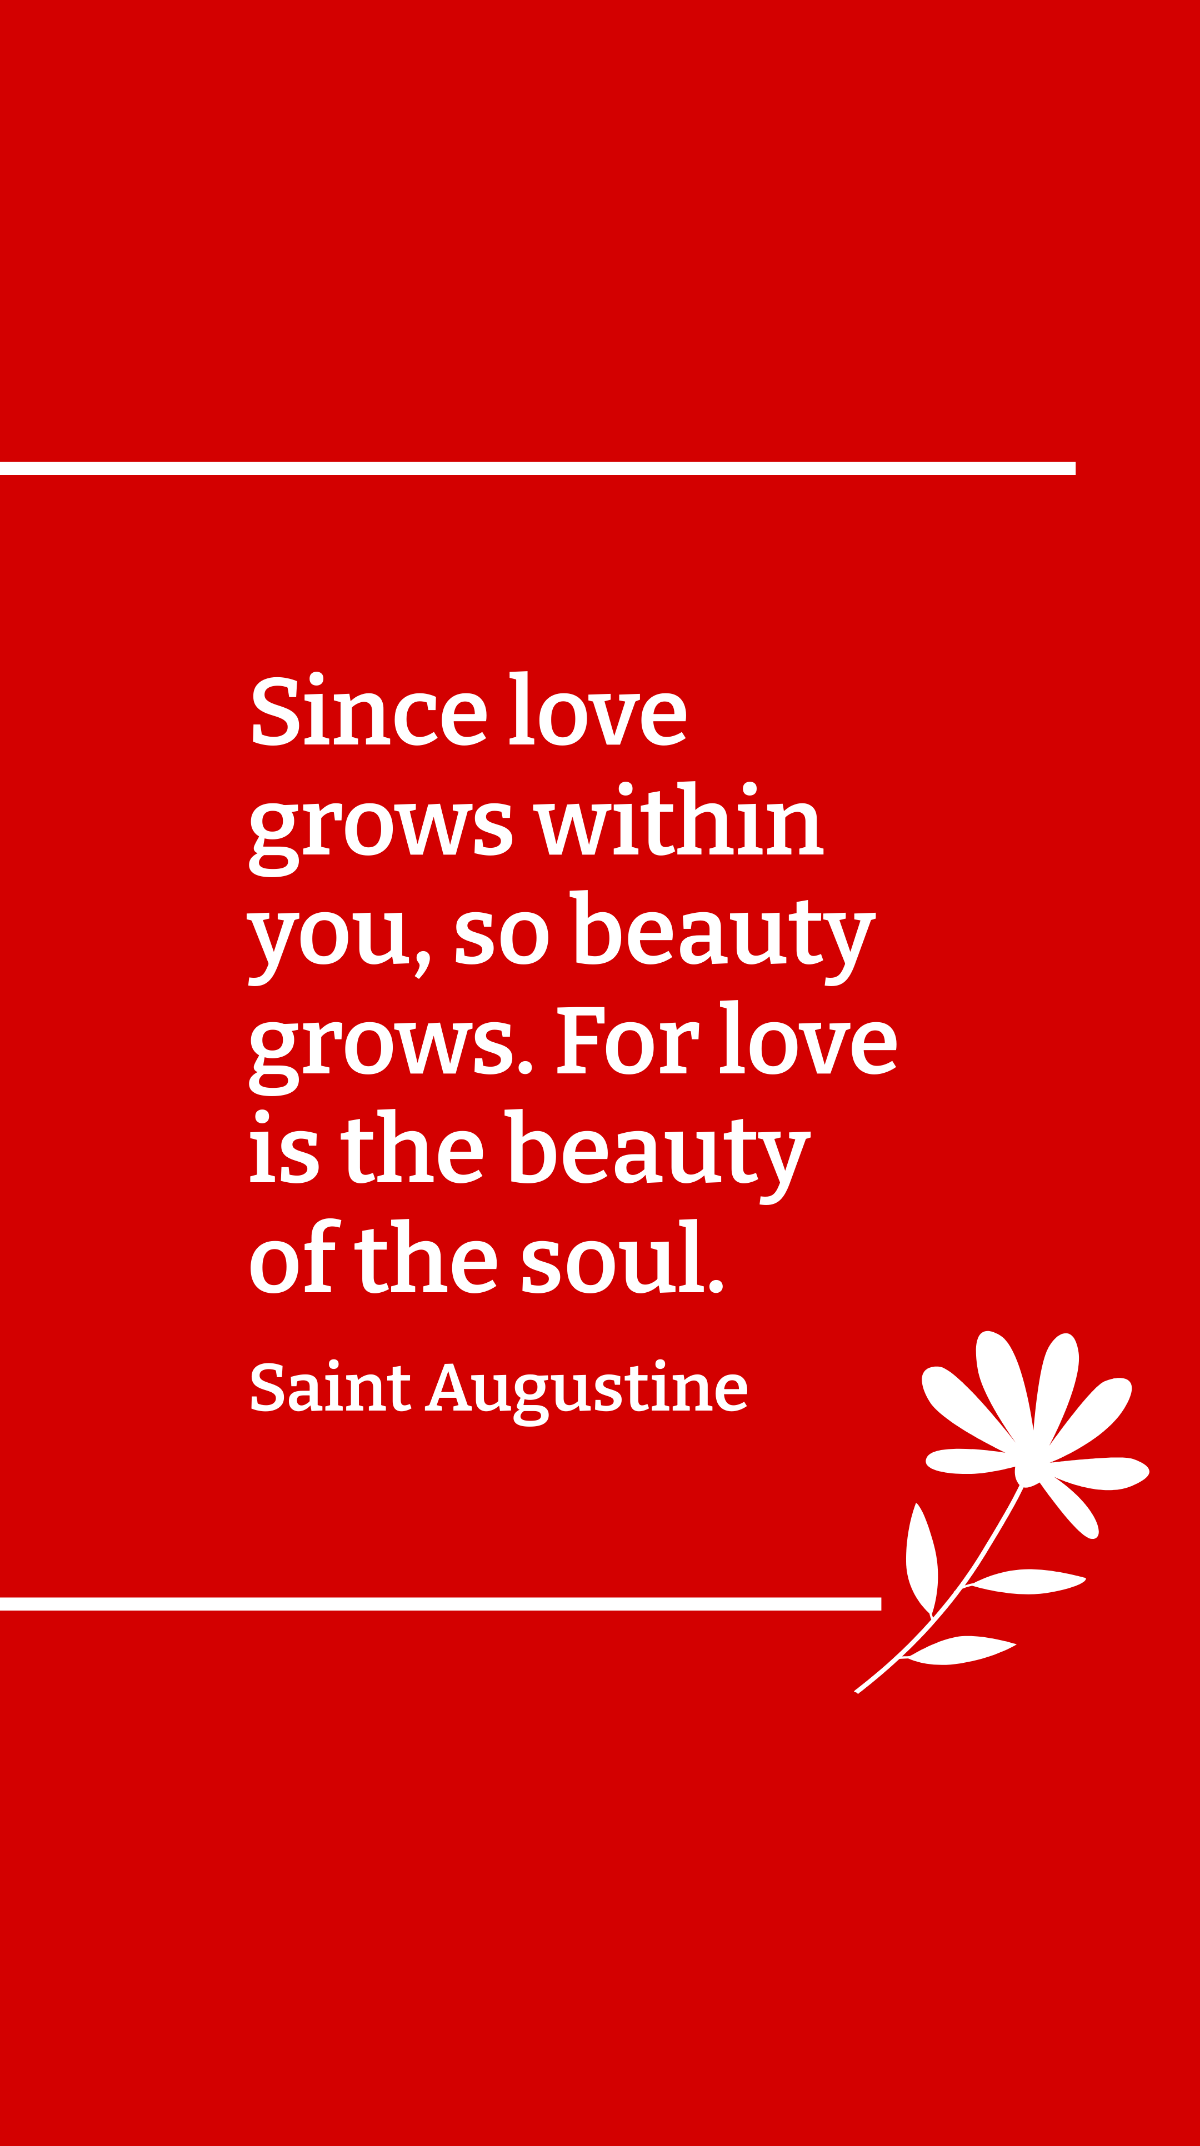 Free Saint Augustine - Since love grows within you, so beauty grows. For love is the beauty of the soul. Template